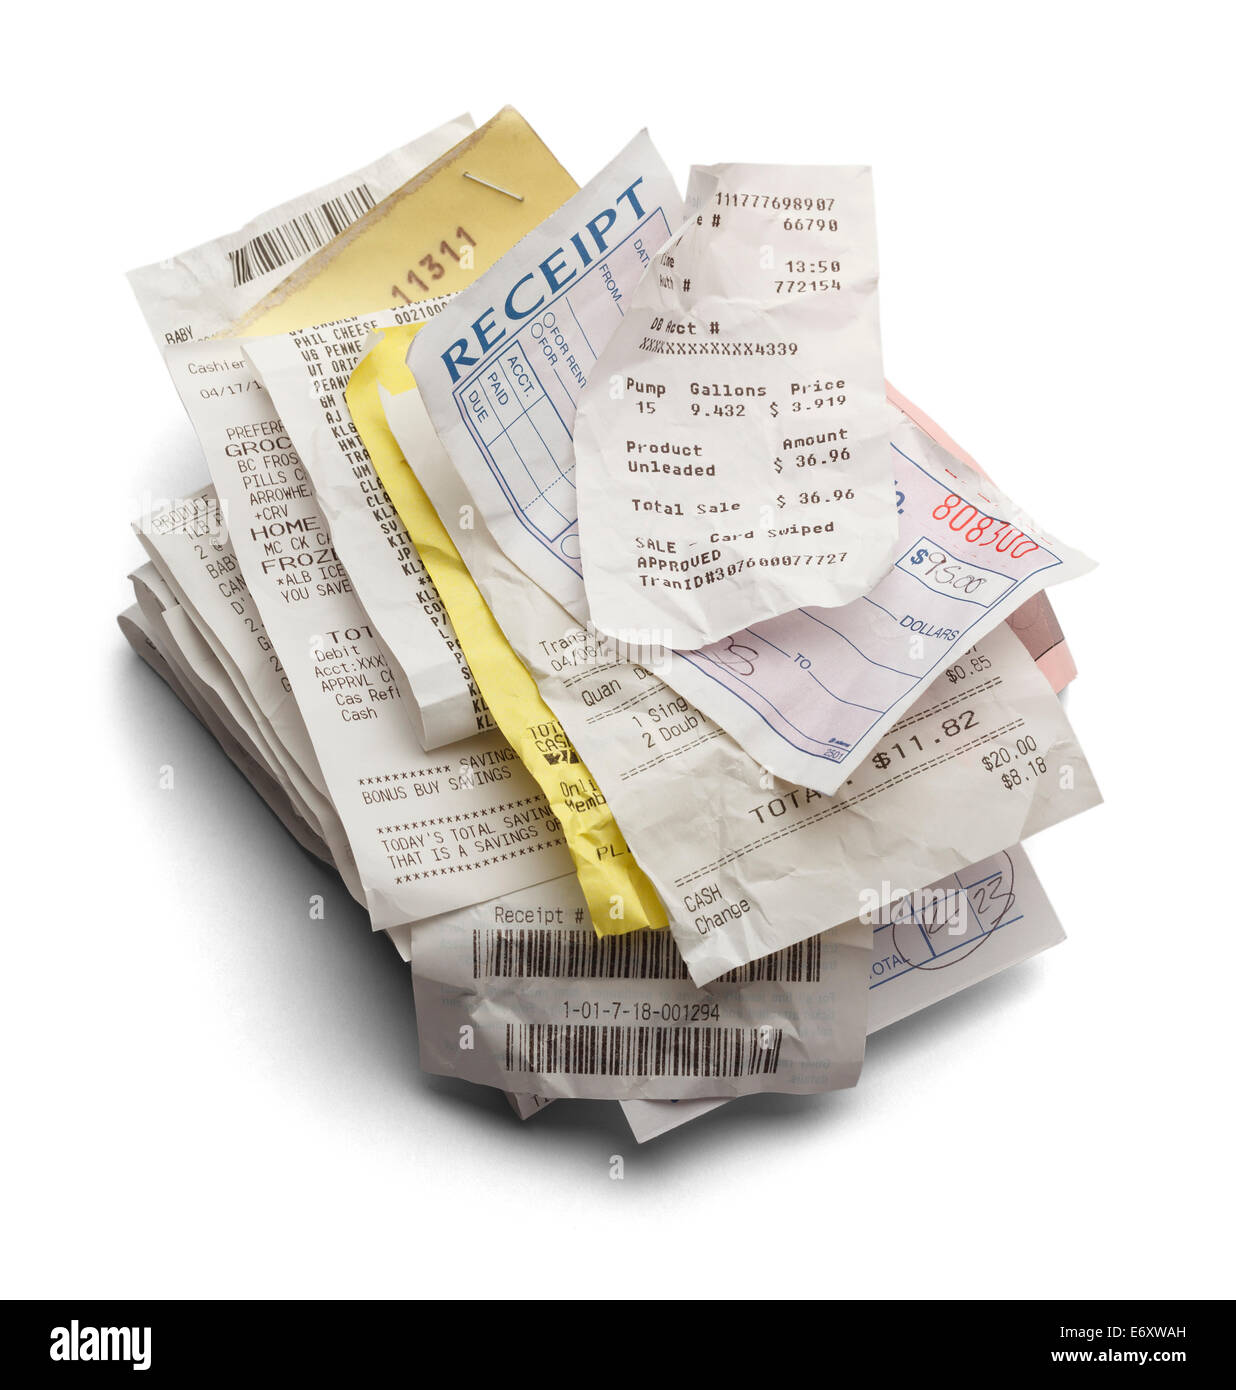 Pile of Varioous Receipts Isolated on White Background. Stock Photo